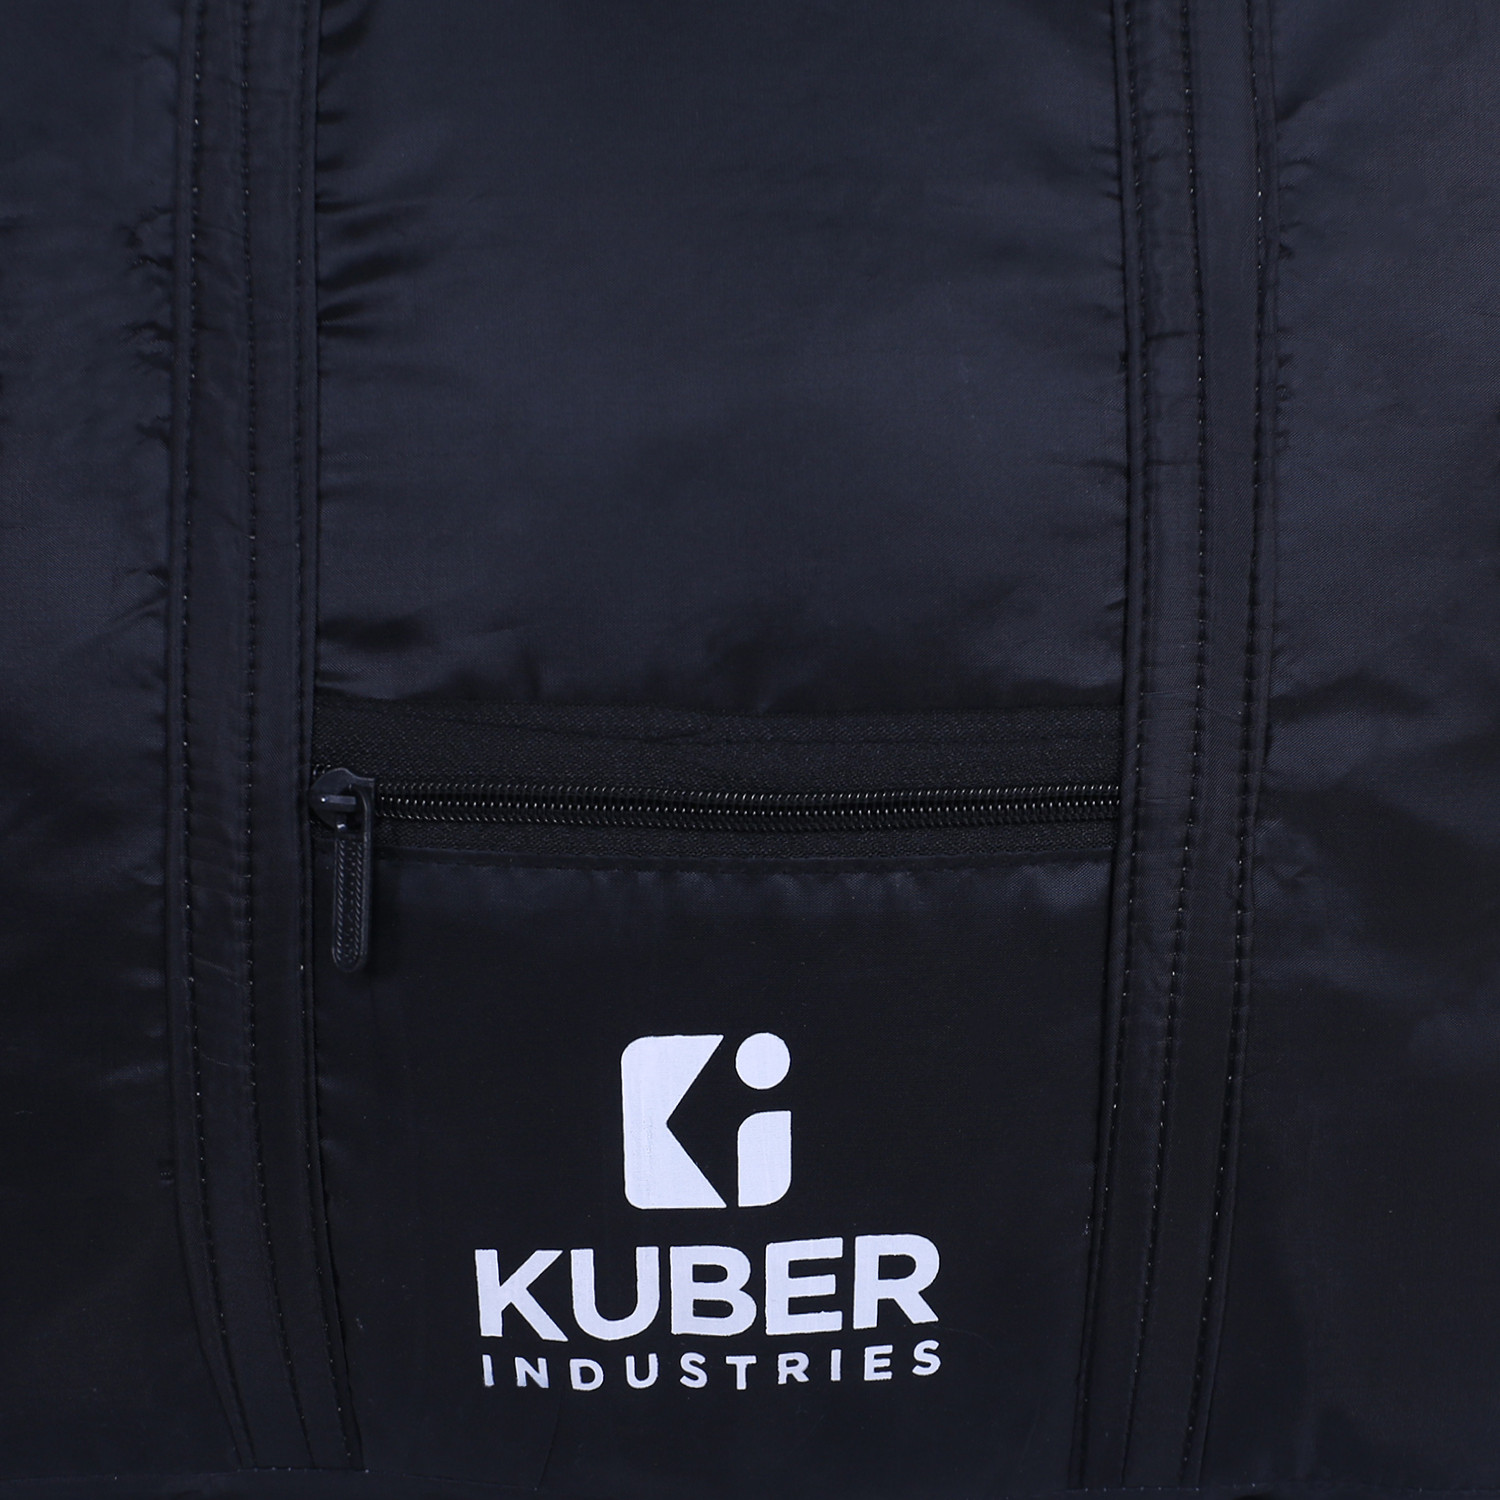 Kuber Industries Shopping Bag|Folding Travel Bag|Polyester Shopping Bag for Grocery|Carrying Bag With Front Small Pocket (Black)